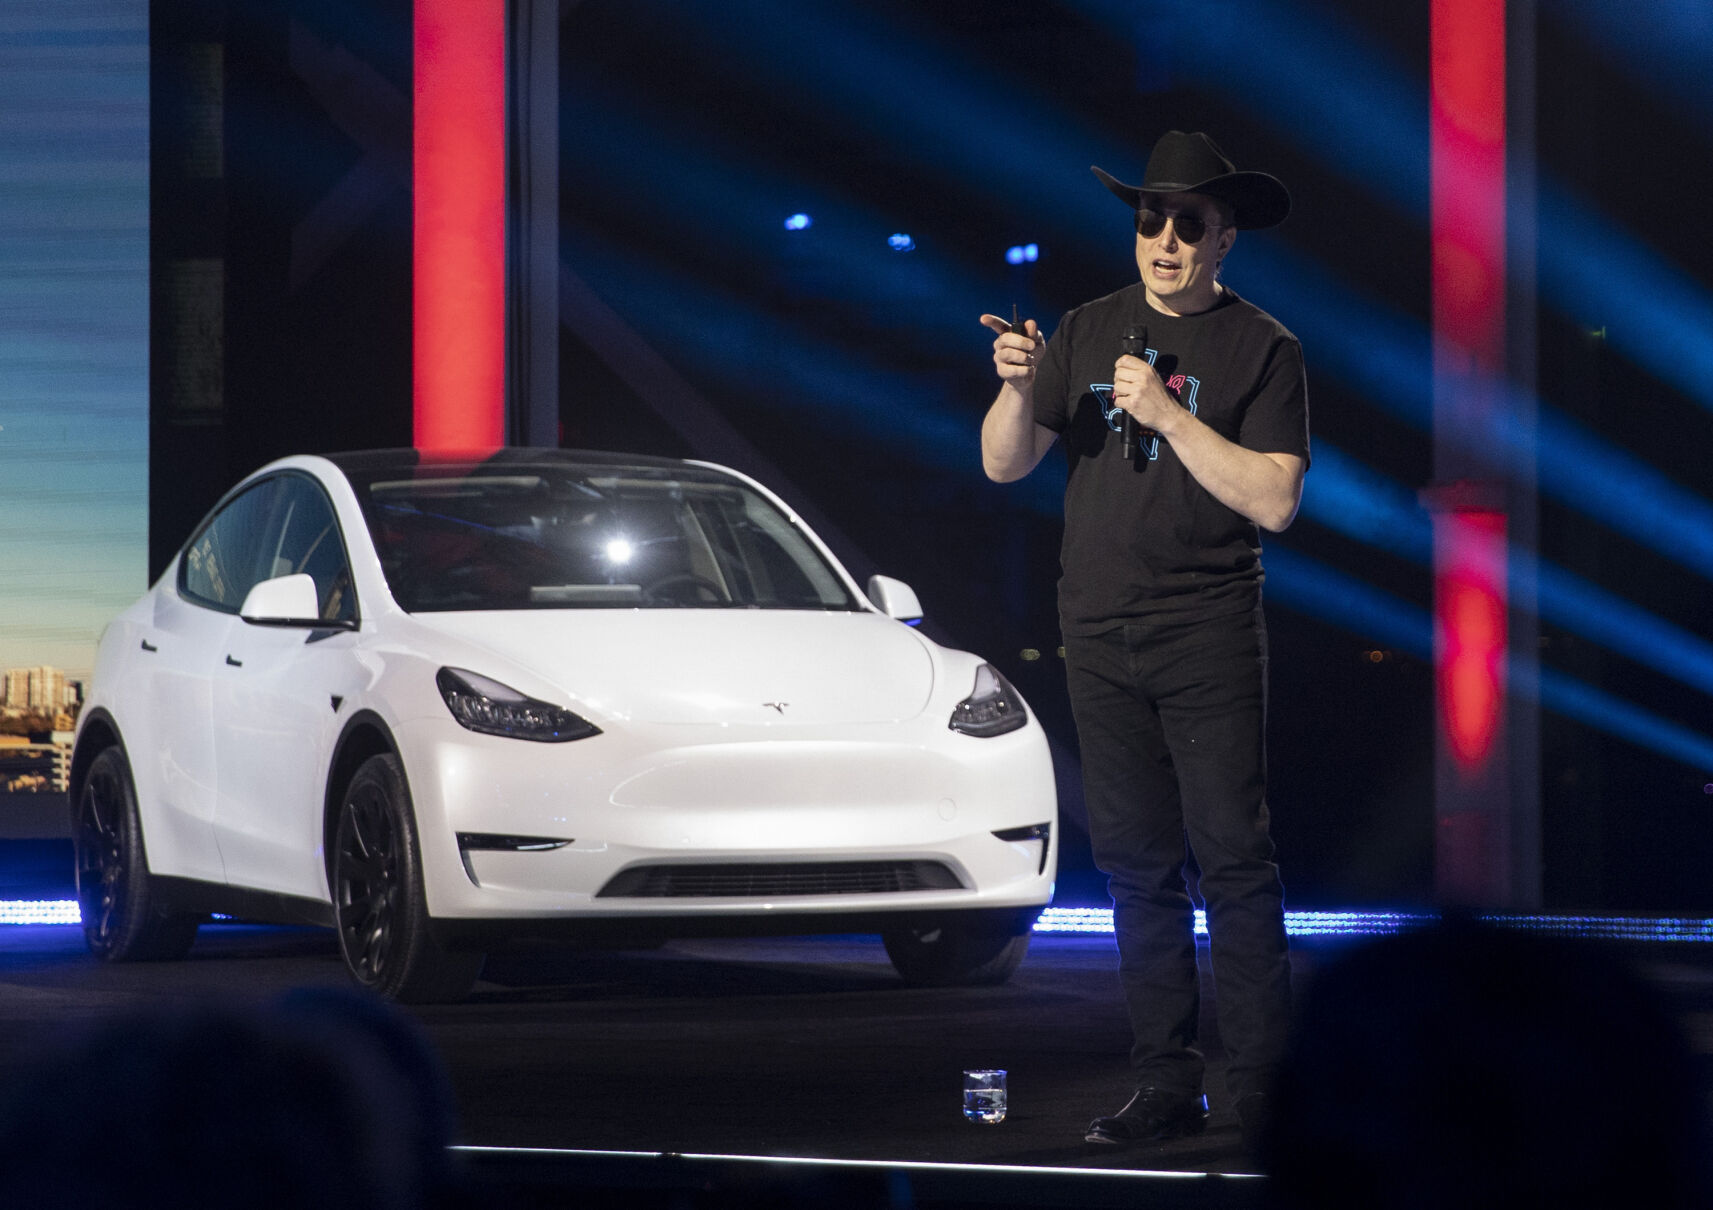 <p>FILE - Tesla CEO Elon Musk speaks at the "Cyber Rodeo" grand opening celebration for the new $1.1 billion Tesla Giga Texas manufacturing facility in Austin, Texas, on Thursday April 7, 2022. Musk says he won’t sell any more shares in Tesla for 18 months or more, likely an attempt to comfort shareholders of the electric vehicle company who have watched the stock lose nearly half of its value since Musk’s purchase of Twitter went through in October. (Jay Janner/Austin American-Statesman via AP, File)</p>   PHOTO CREDIT: Jay Janner - member, Austin American-Statesman